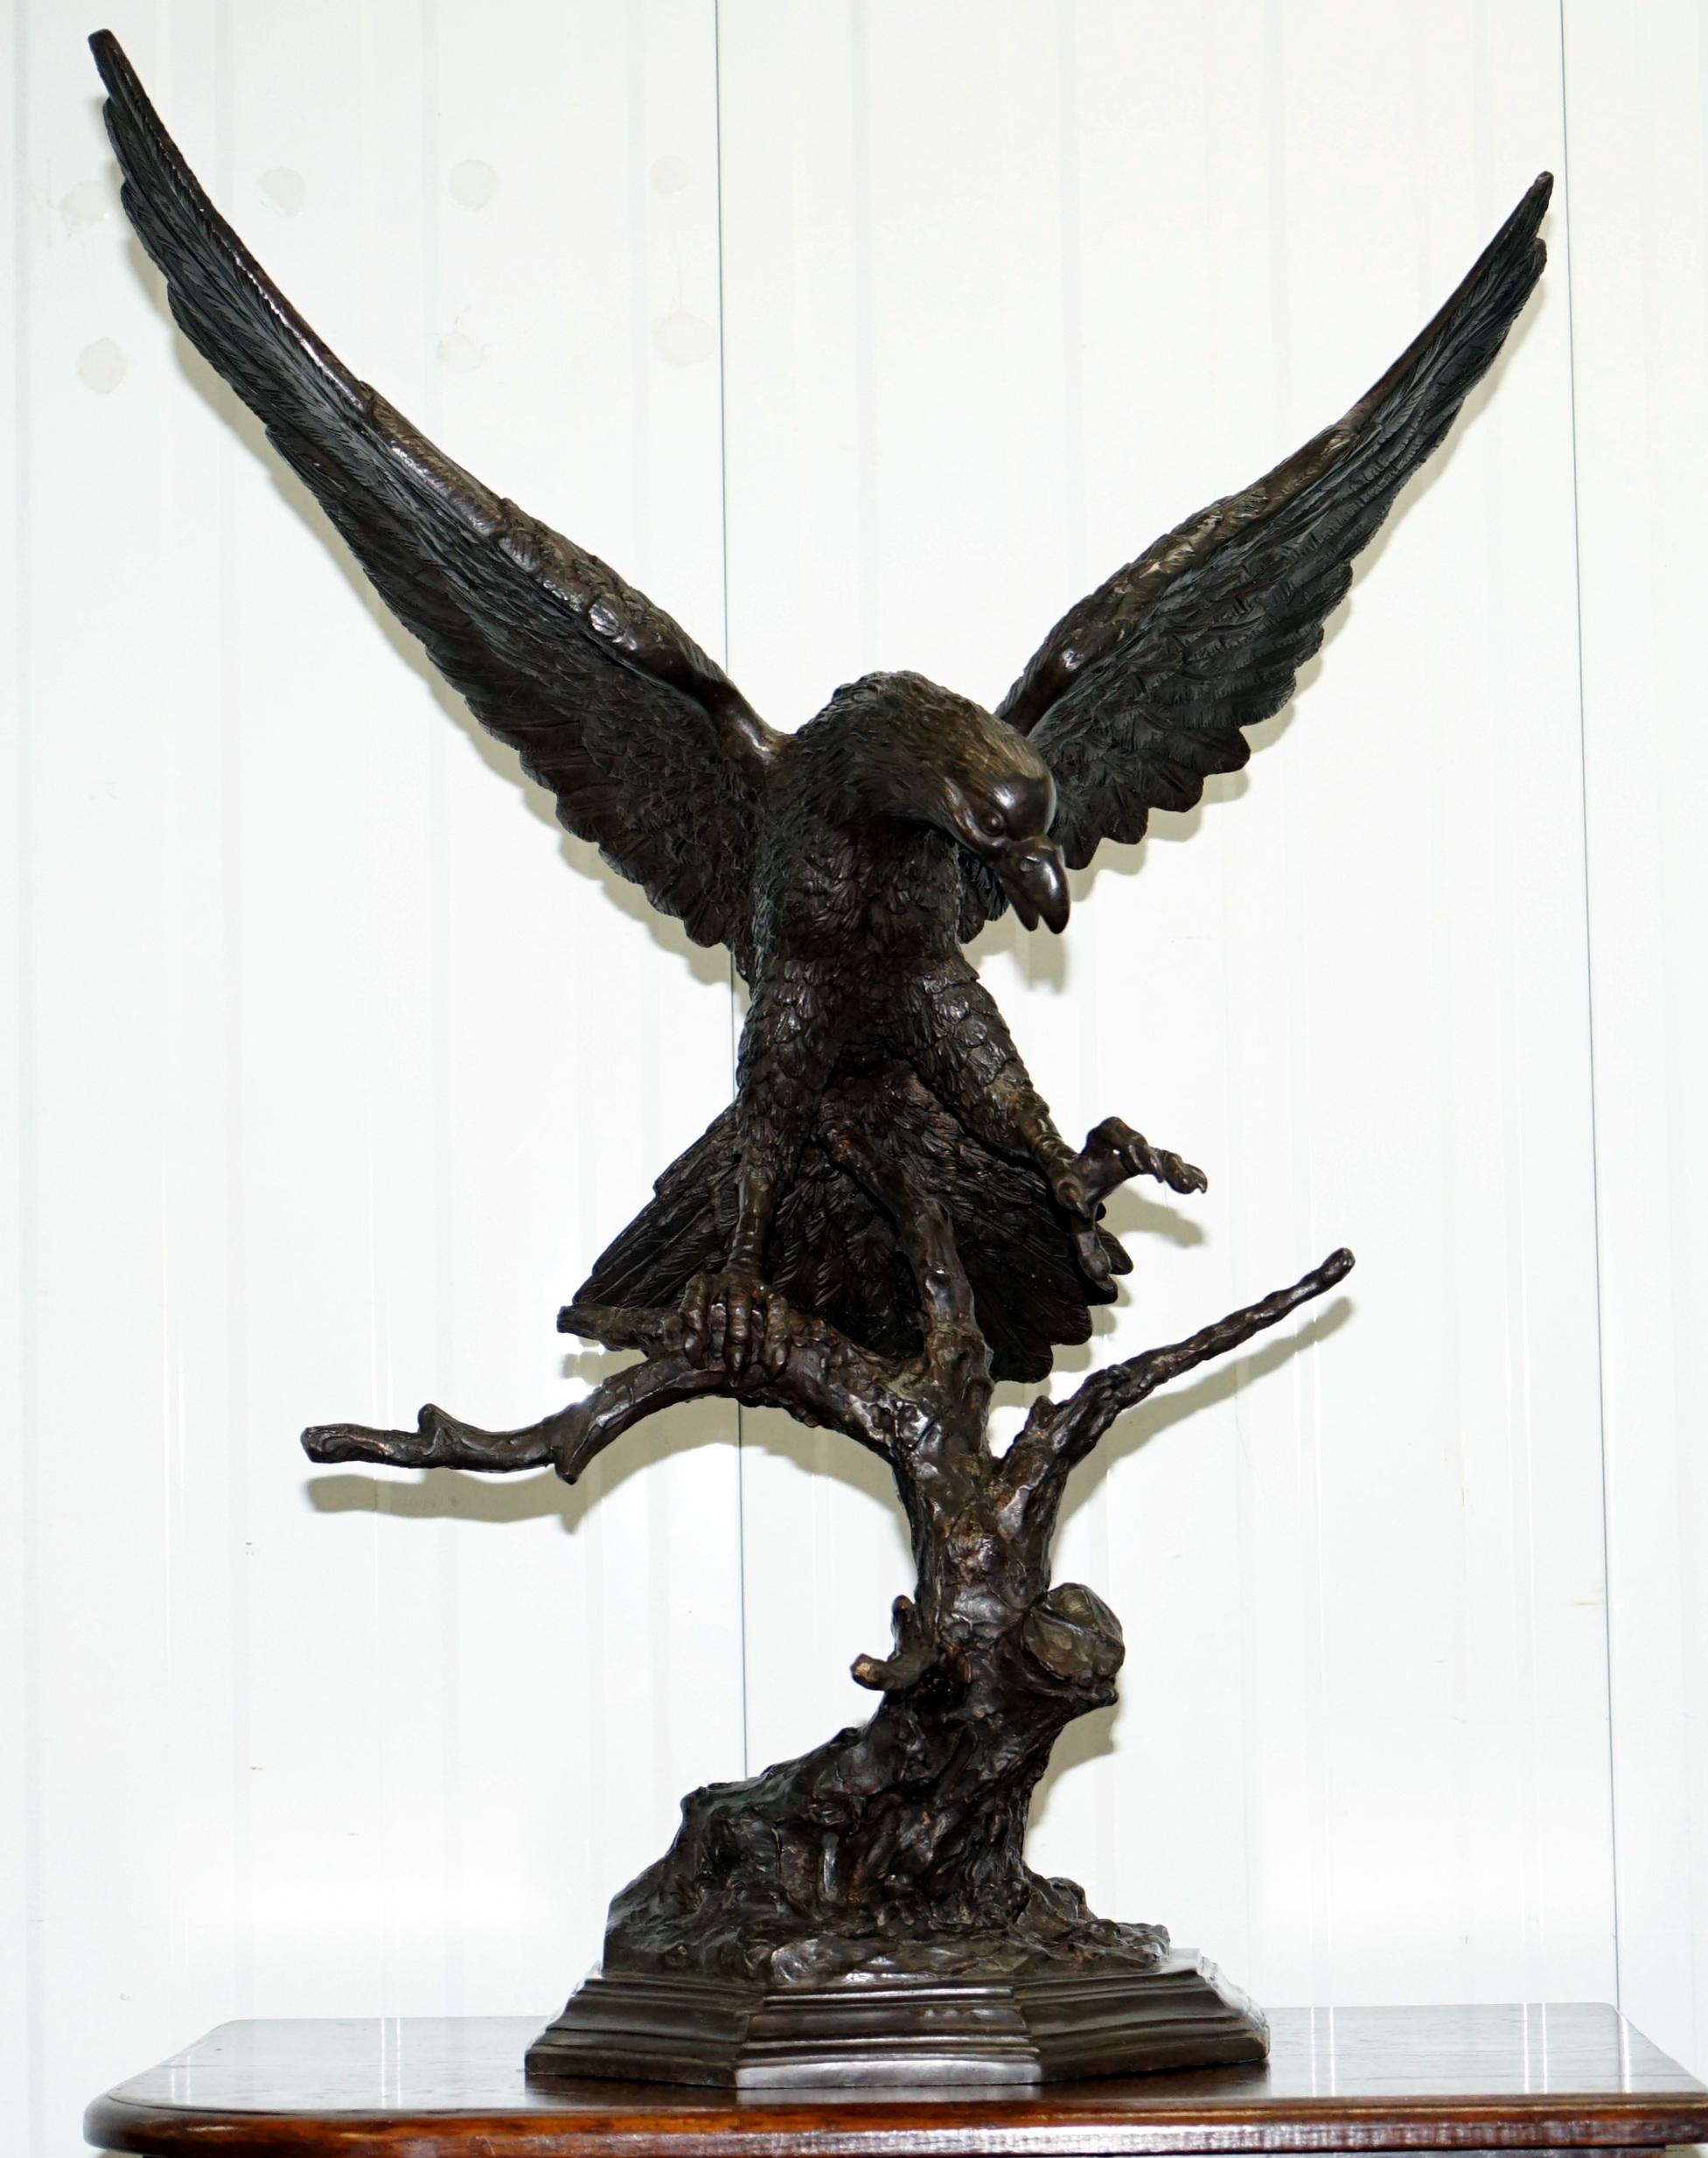 We are delighted to offer for sale this stunning very large eagle sculpture signed by the sculptor Jules Moigniez circa 1860

19th century French bronze of an eagle by Jules Moigniez.

Jules Moigniez: Jules Moigniez (28 May 1835 – 29 May 1894)